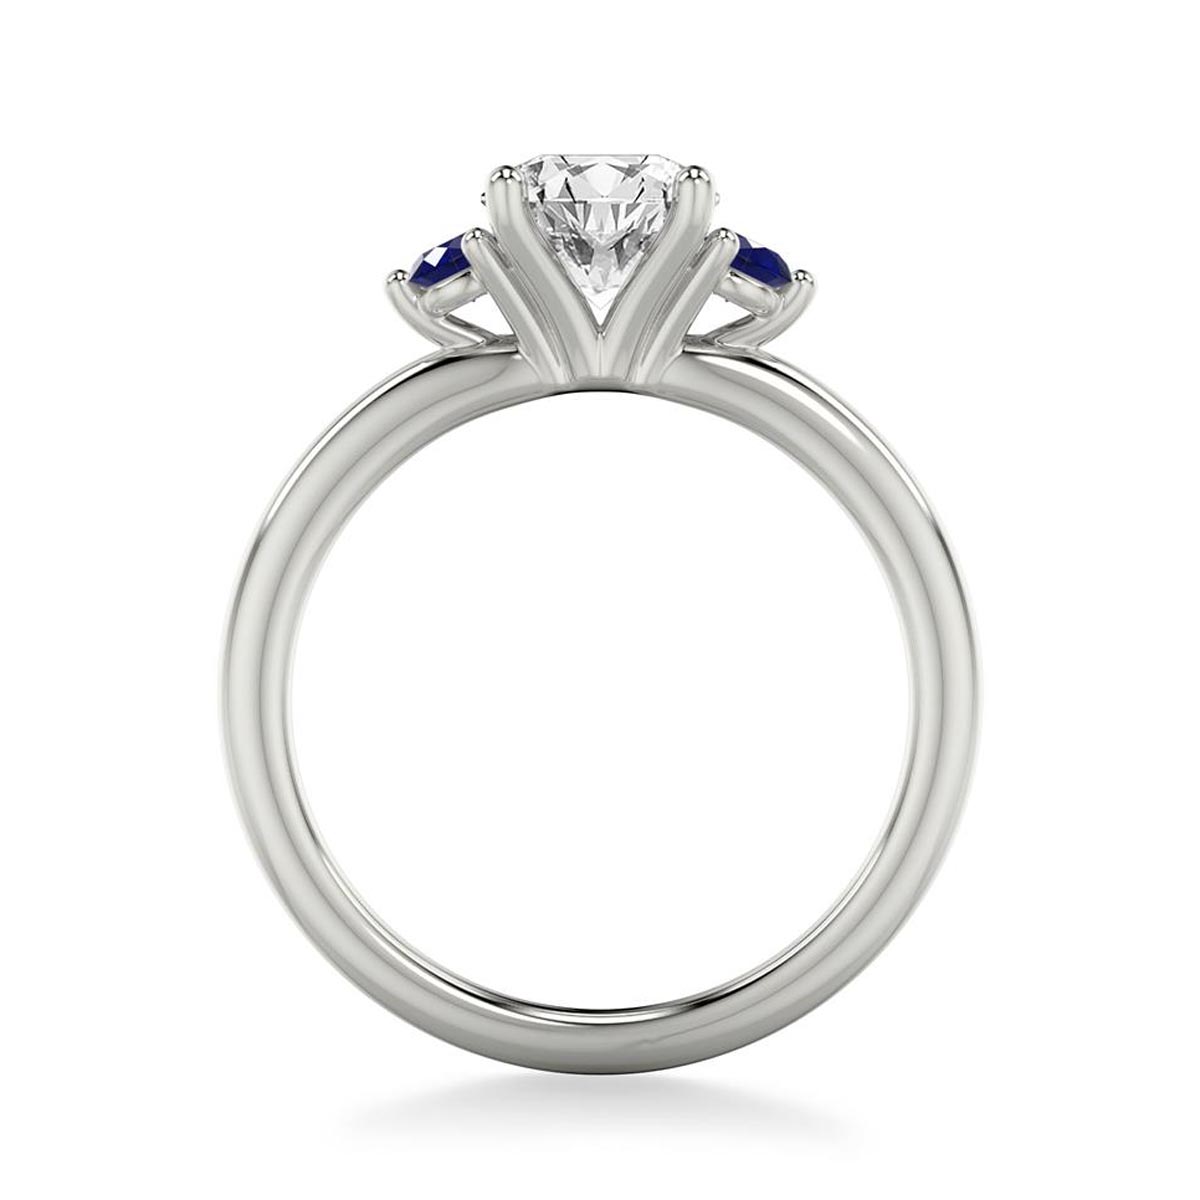 Artcarved Classic Three Stone Diamond Engagement Ring Setting in 14kt White Gold with Sapphires